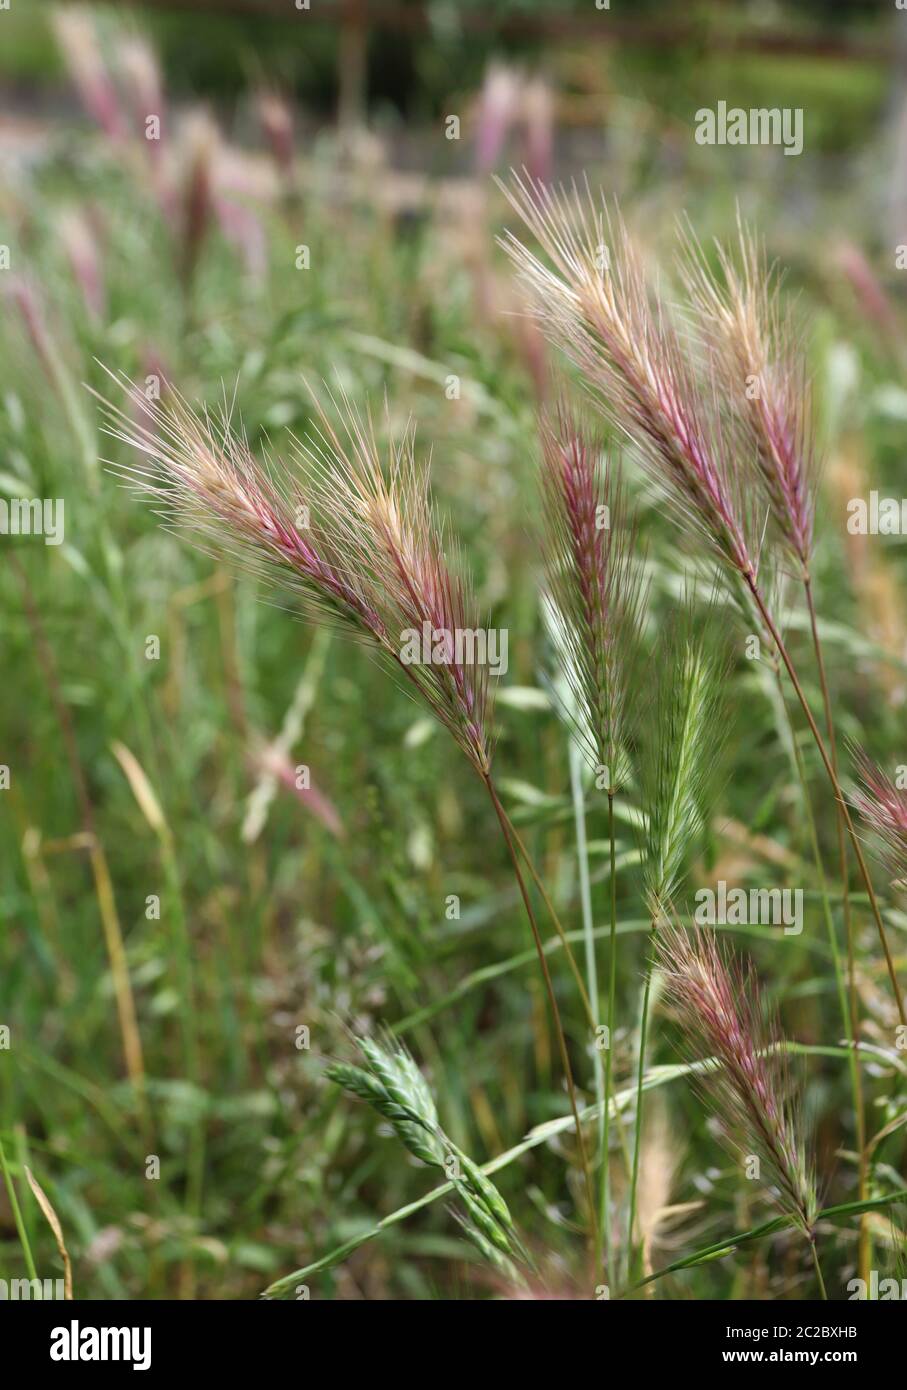 Grass awns that can be dangerous for dogs. June grass ears. vertical Stock Photo